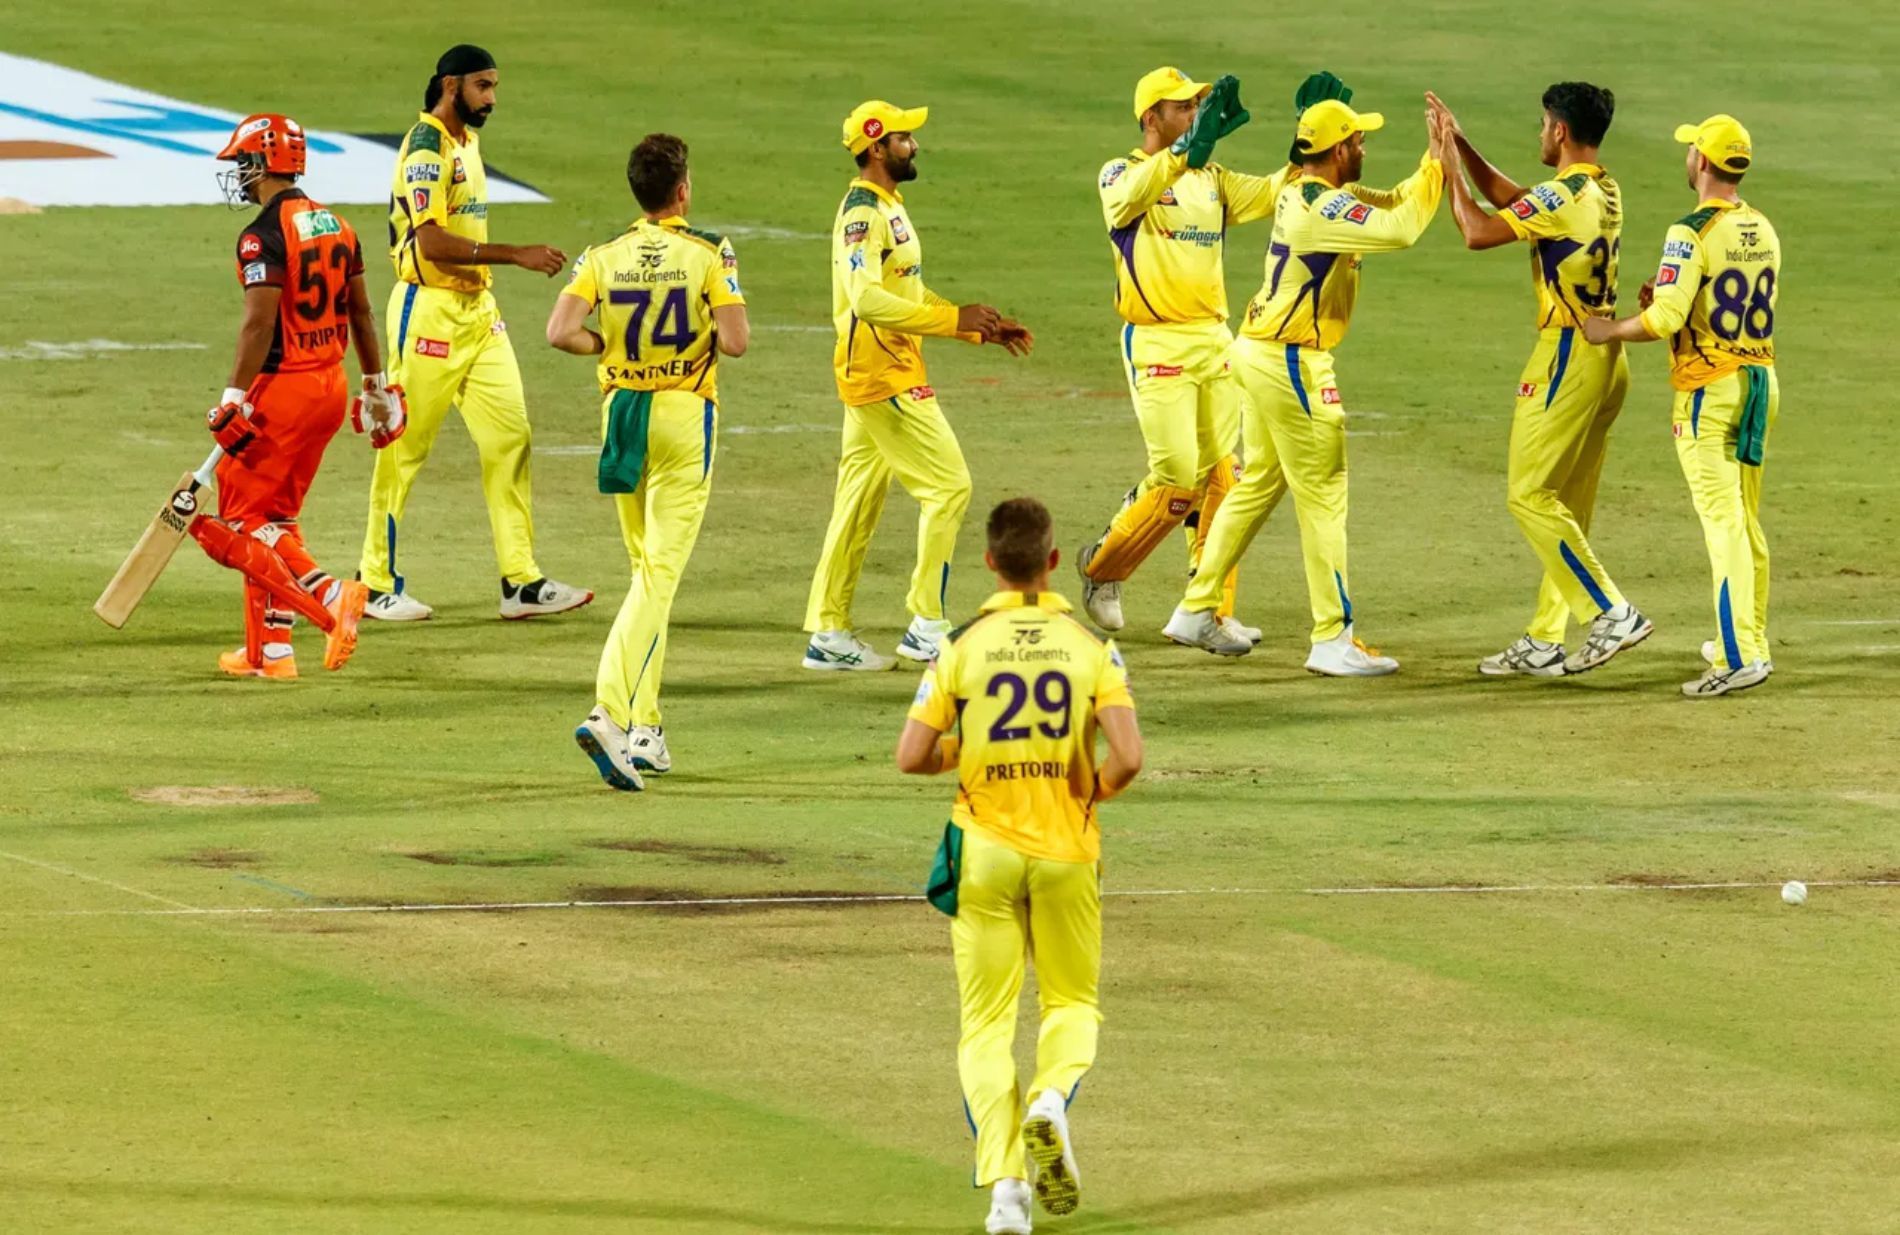 Chennai players celebrate a wicket during the match against Hyderabad. Pic: IPLT20.COM